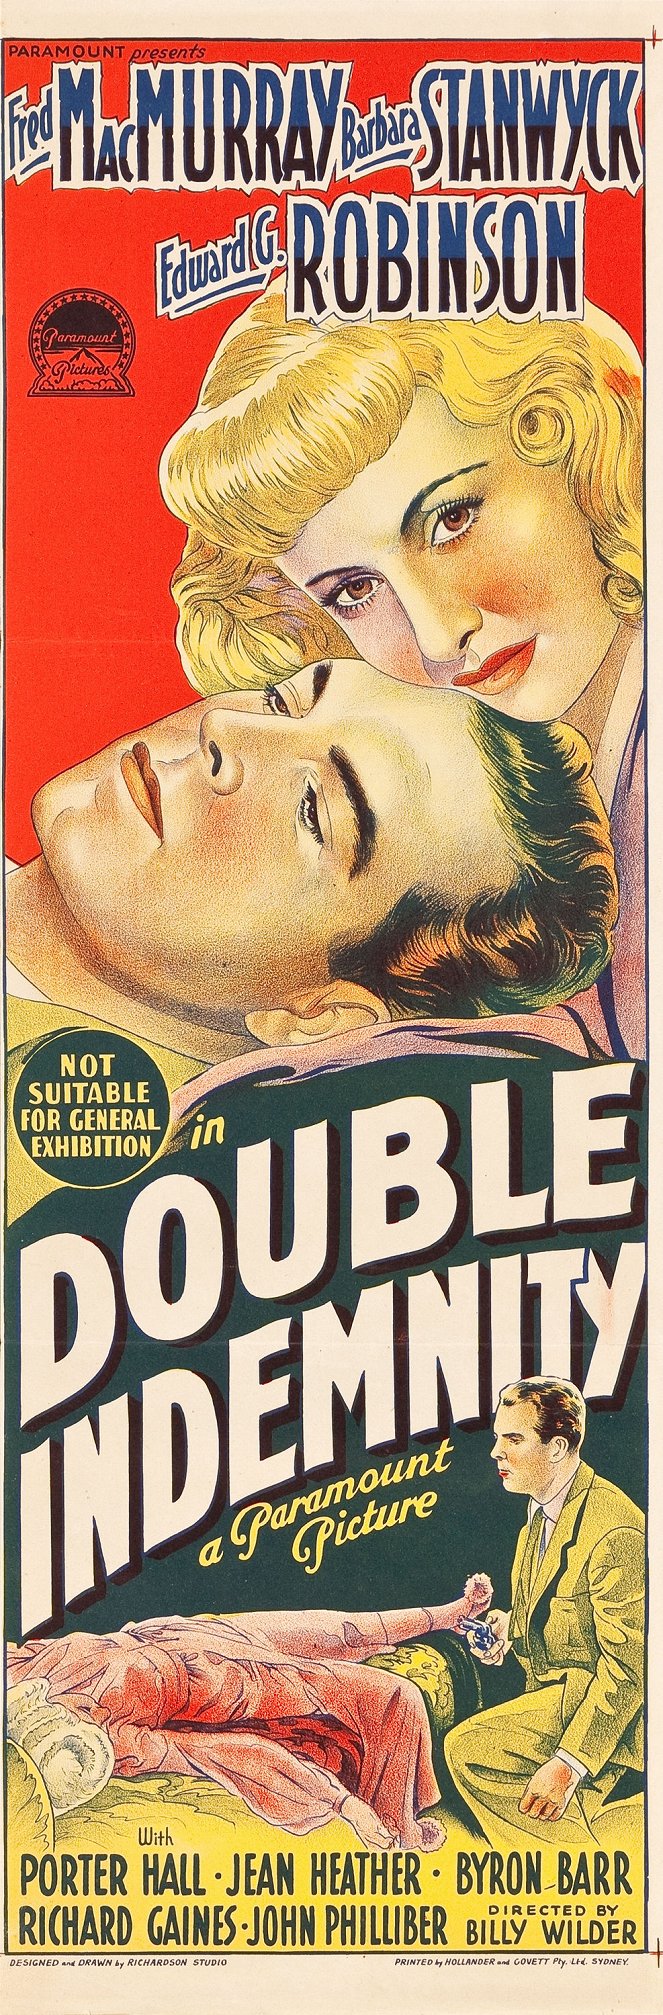 Double Indemnity - Posters